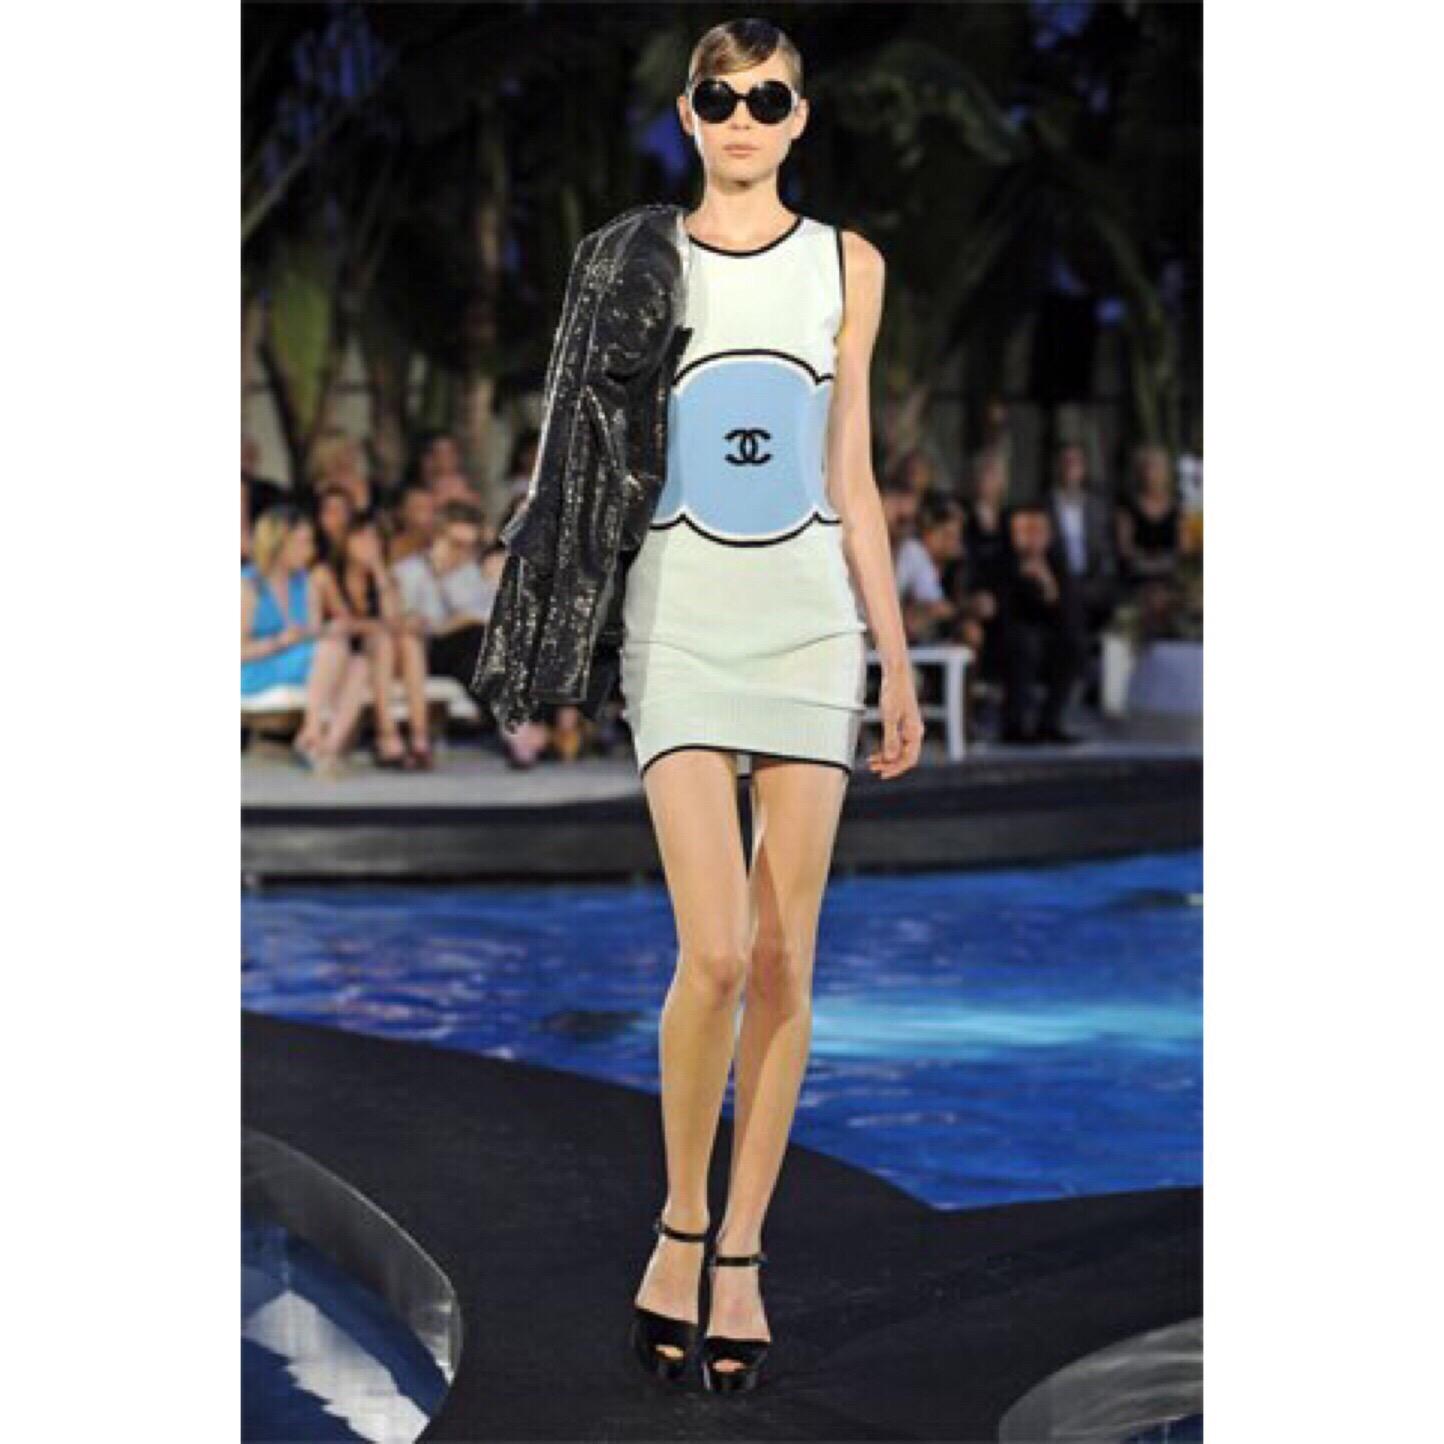 The Chanel Resort lines are where you can see a different side of the house. Softer lines and more mellow silhouettes in the 2009 collection subtly evoke Coco Chanel’s playfulness and out-and-about personality mixed with a 60s Mod flair. This fine